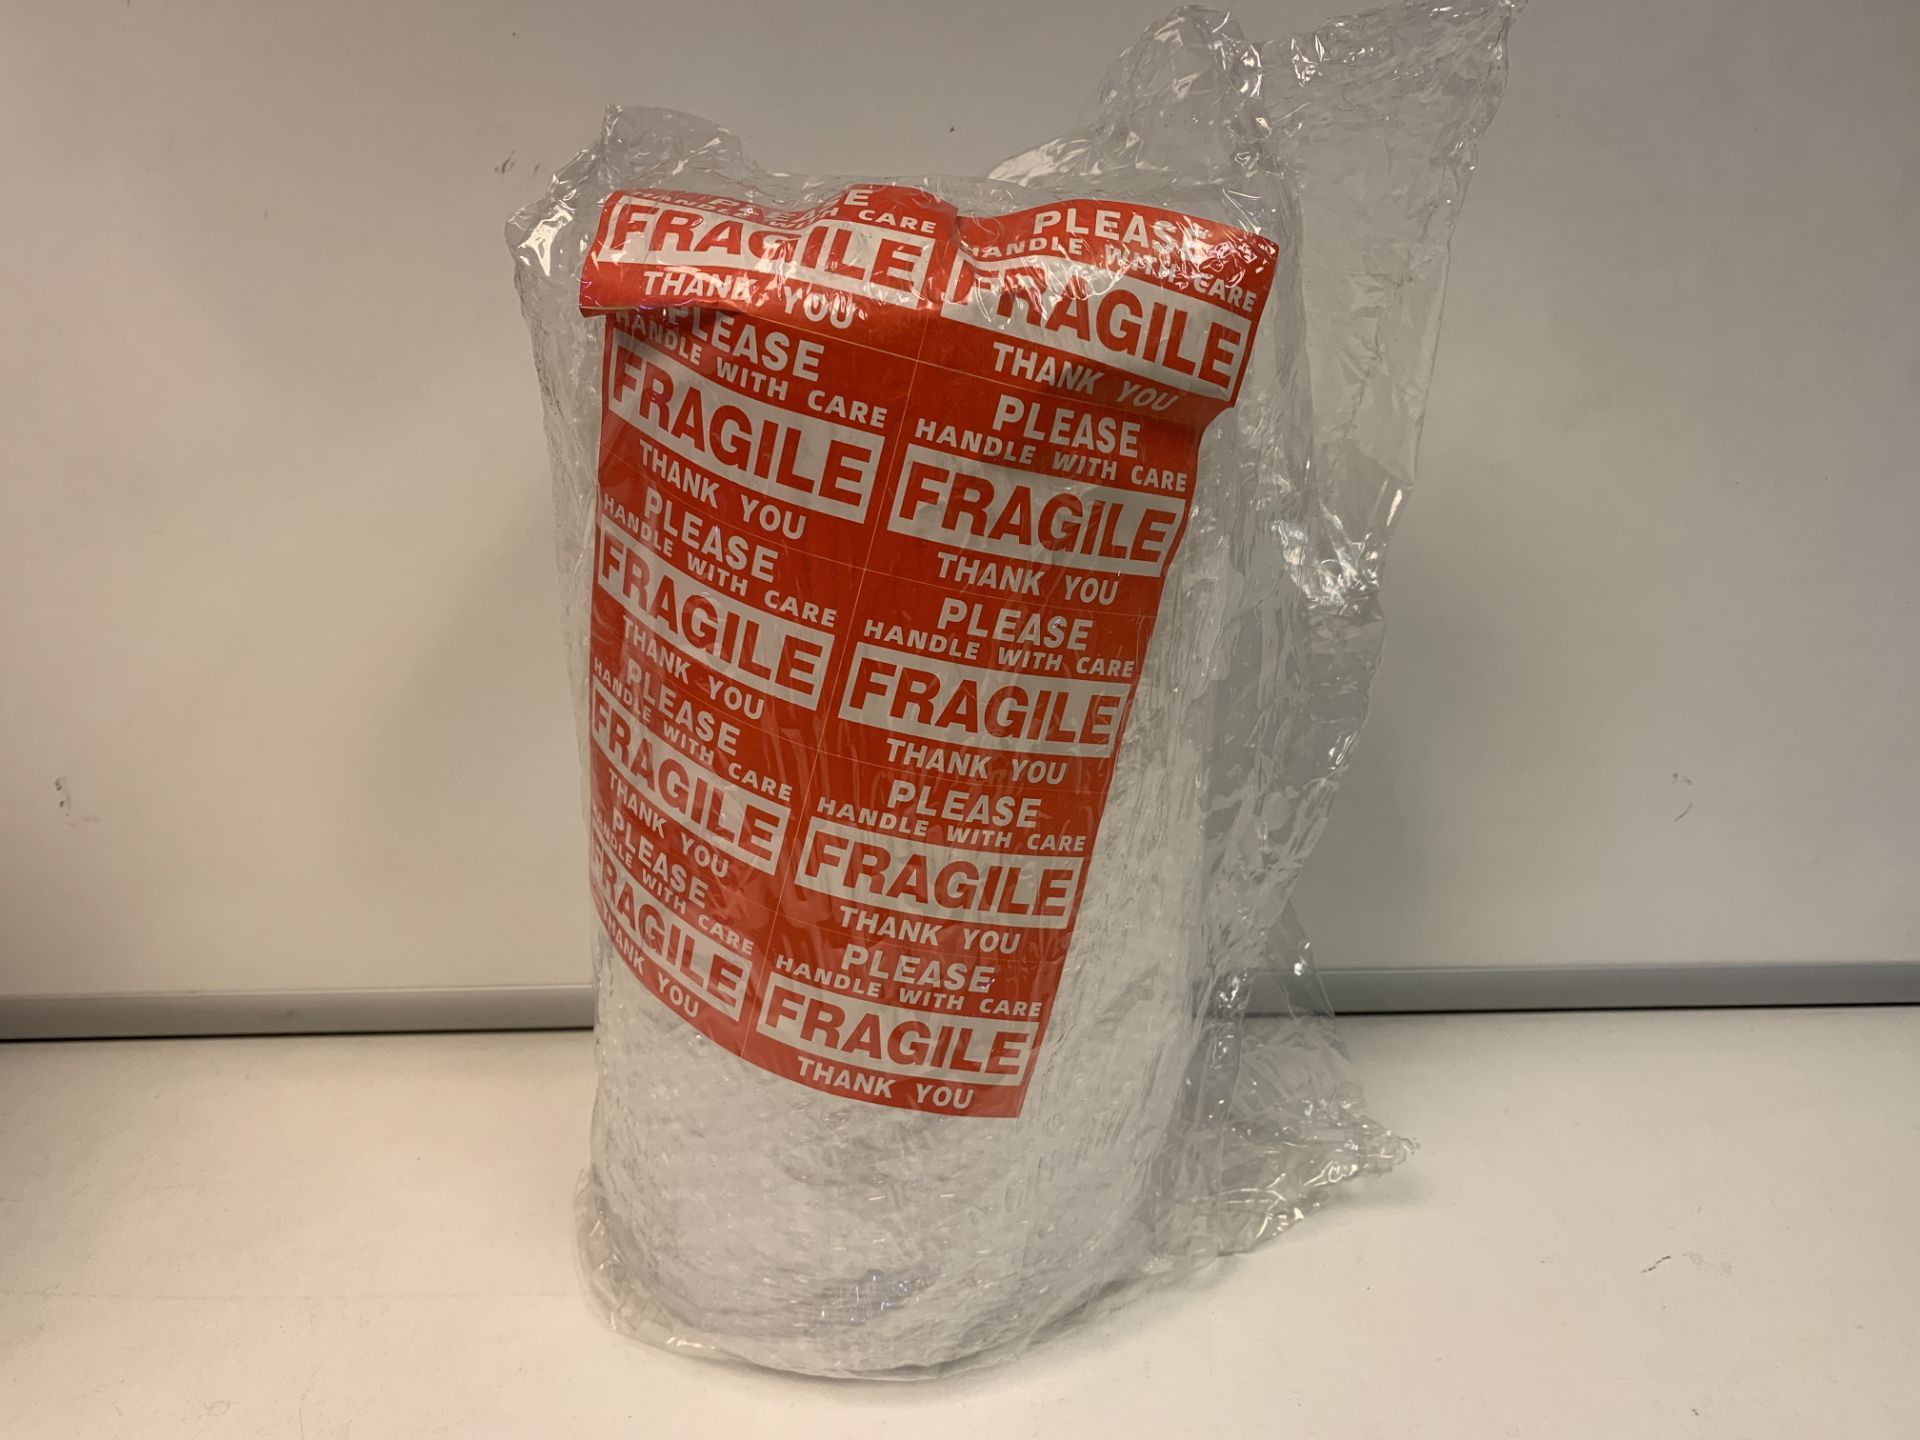 30 ROLLS OF OFFICETECTURE 300MMx11M BUBBLE WRAP EACH INCLUDES 10 X FRAGILE STICKERS (BACK-PCK)